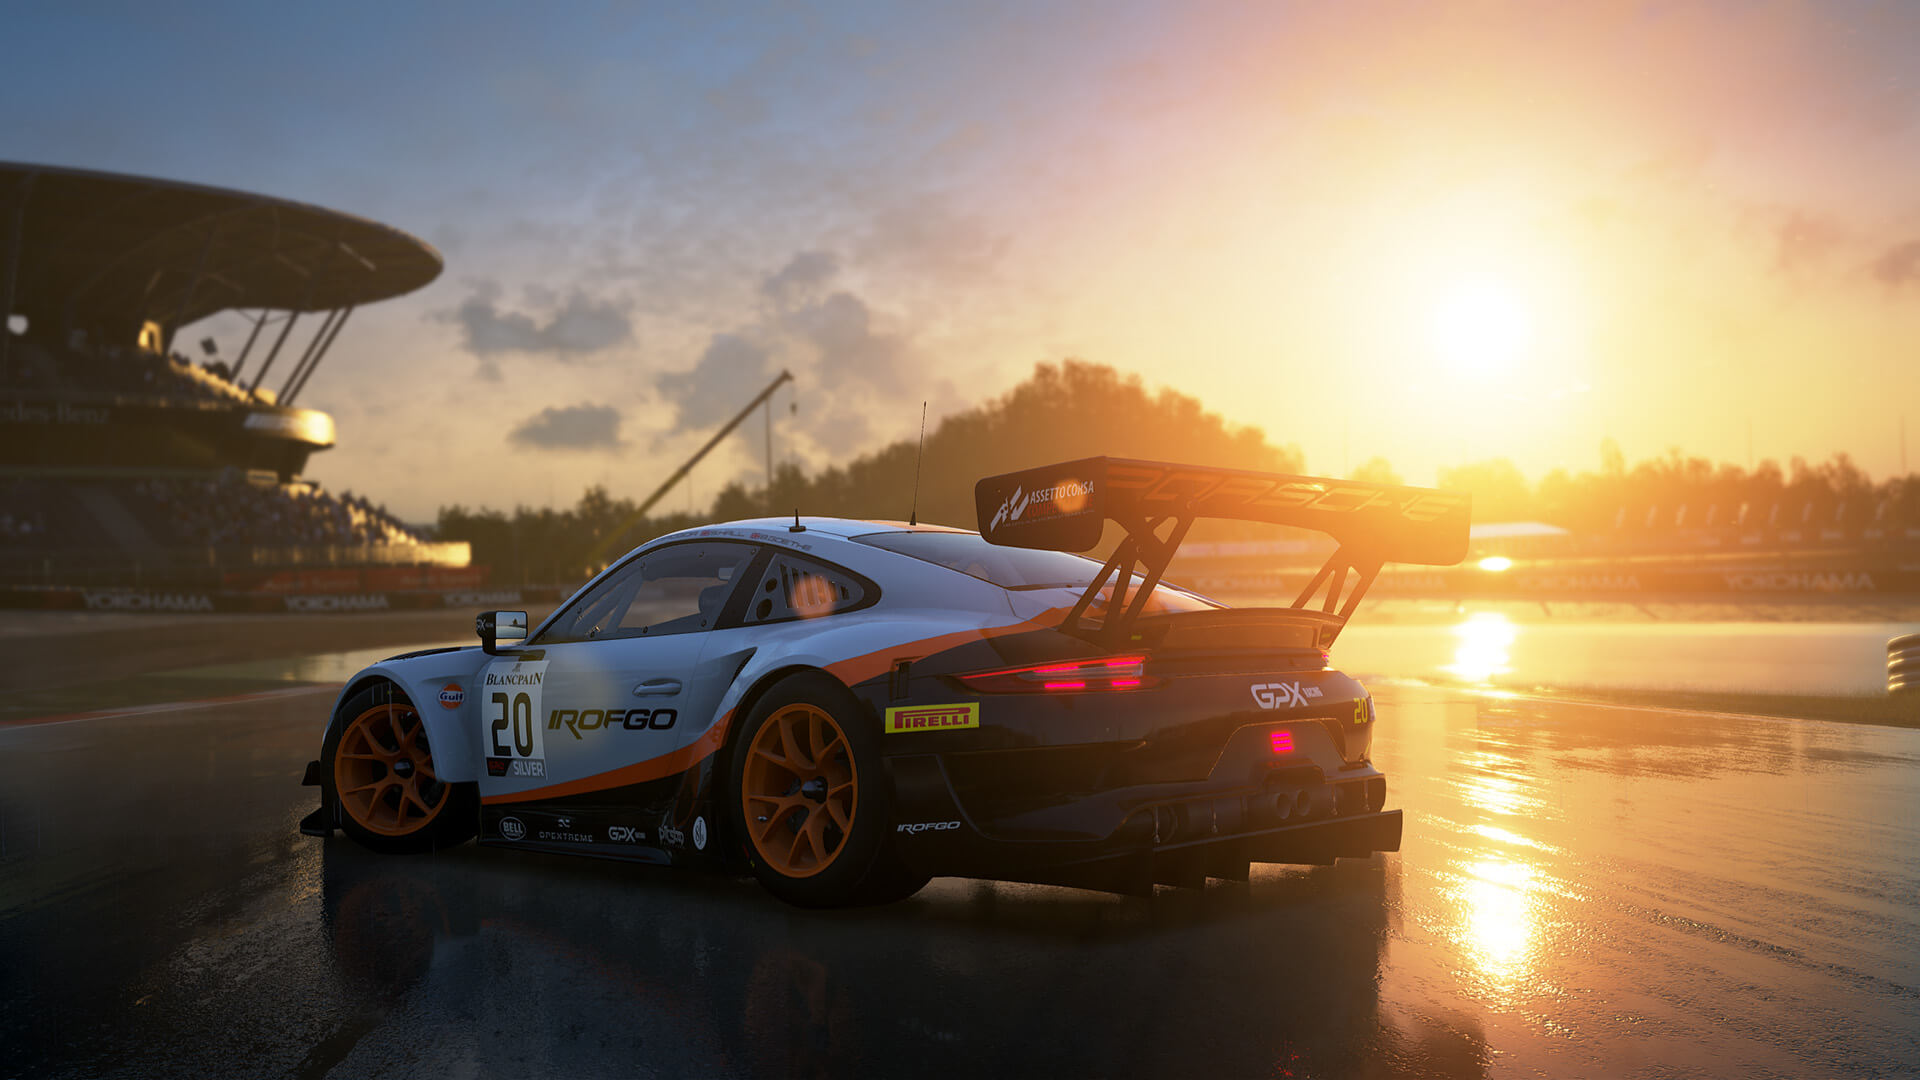 Assetto Corsa Competizione v1.1 Update Arrives, Adds Six New Cars and